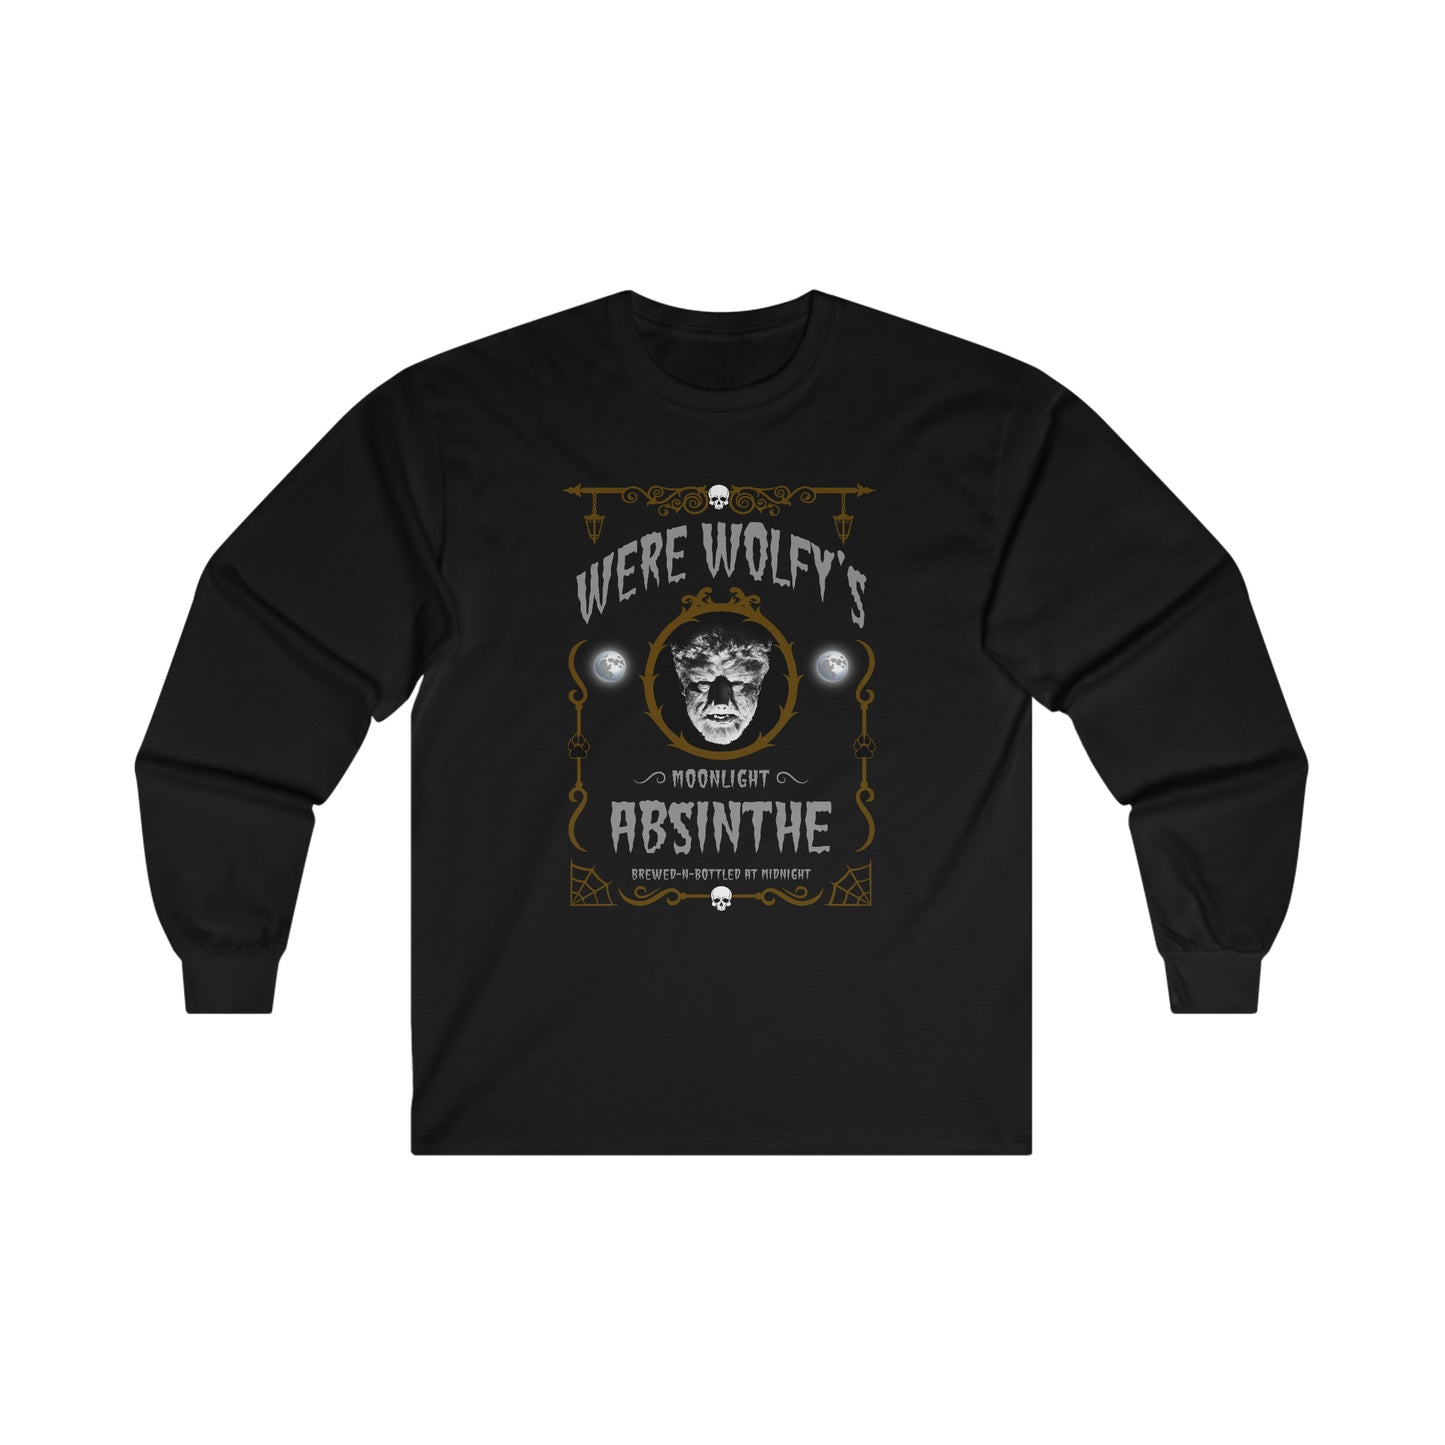 ABSINTHE MONSTERS 10 (WERE WOLFY) Ultra Cotton Long Sleeve Tee